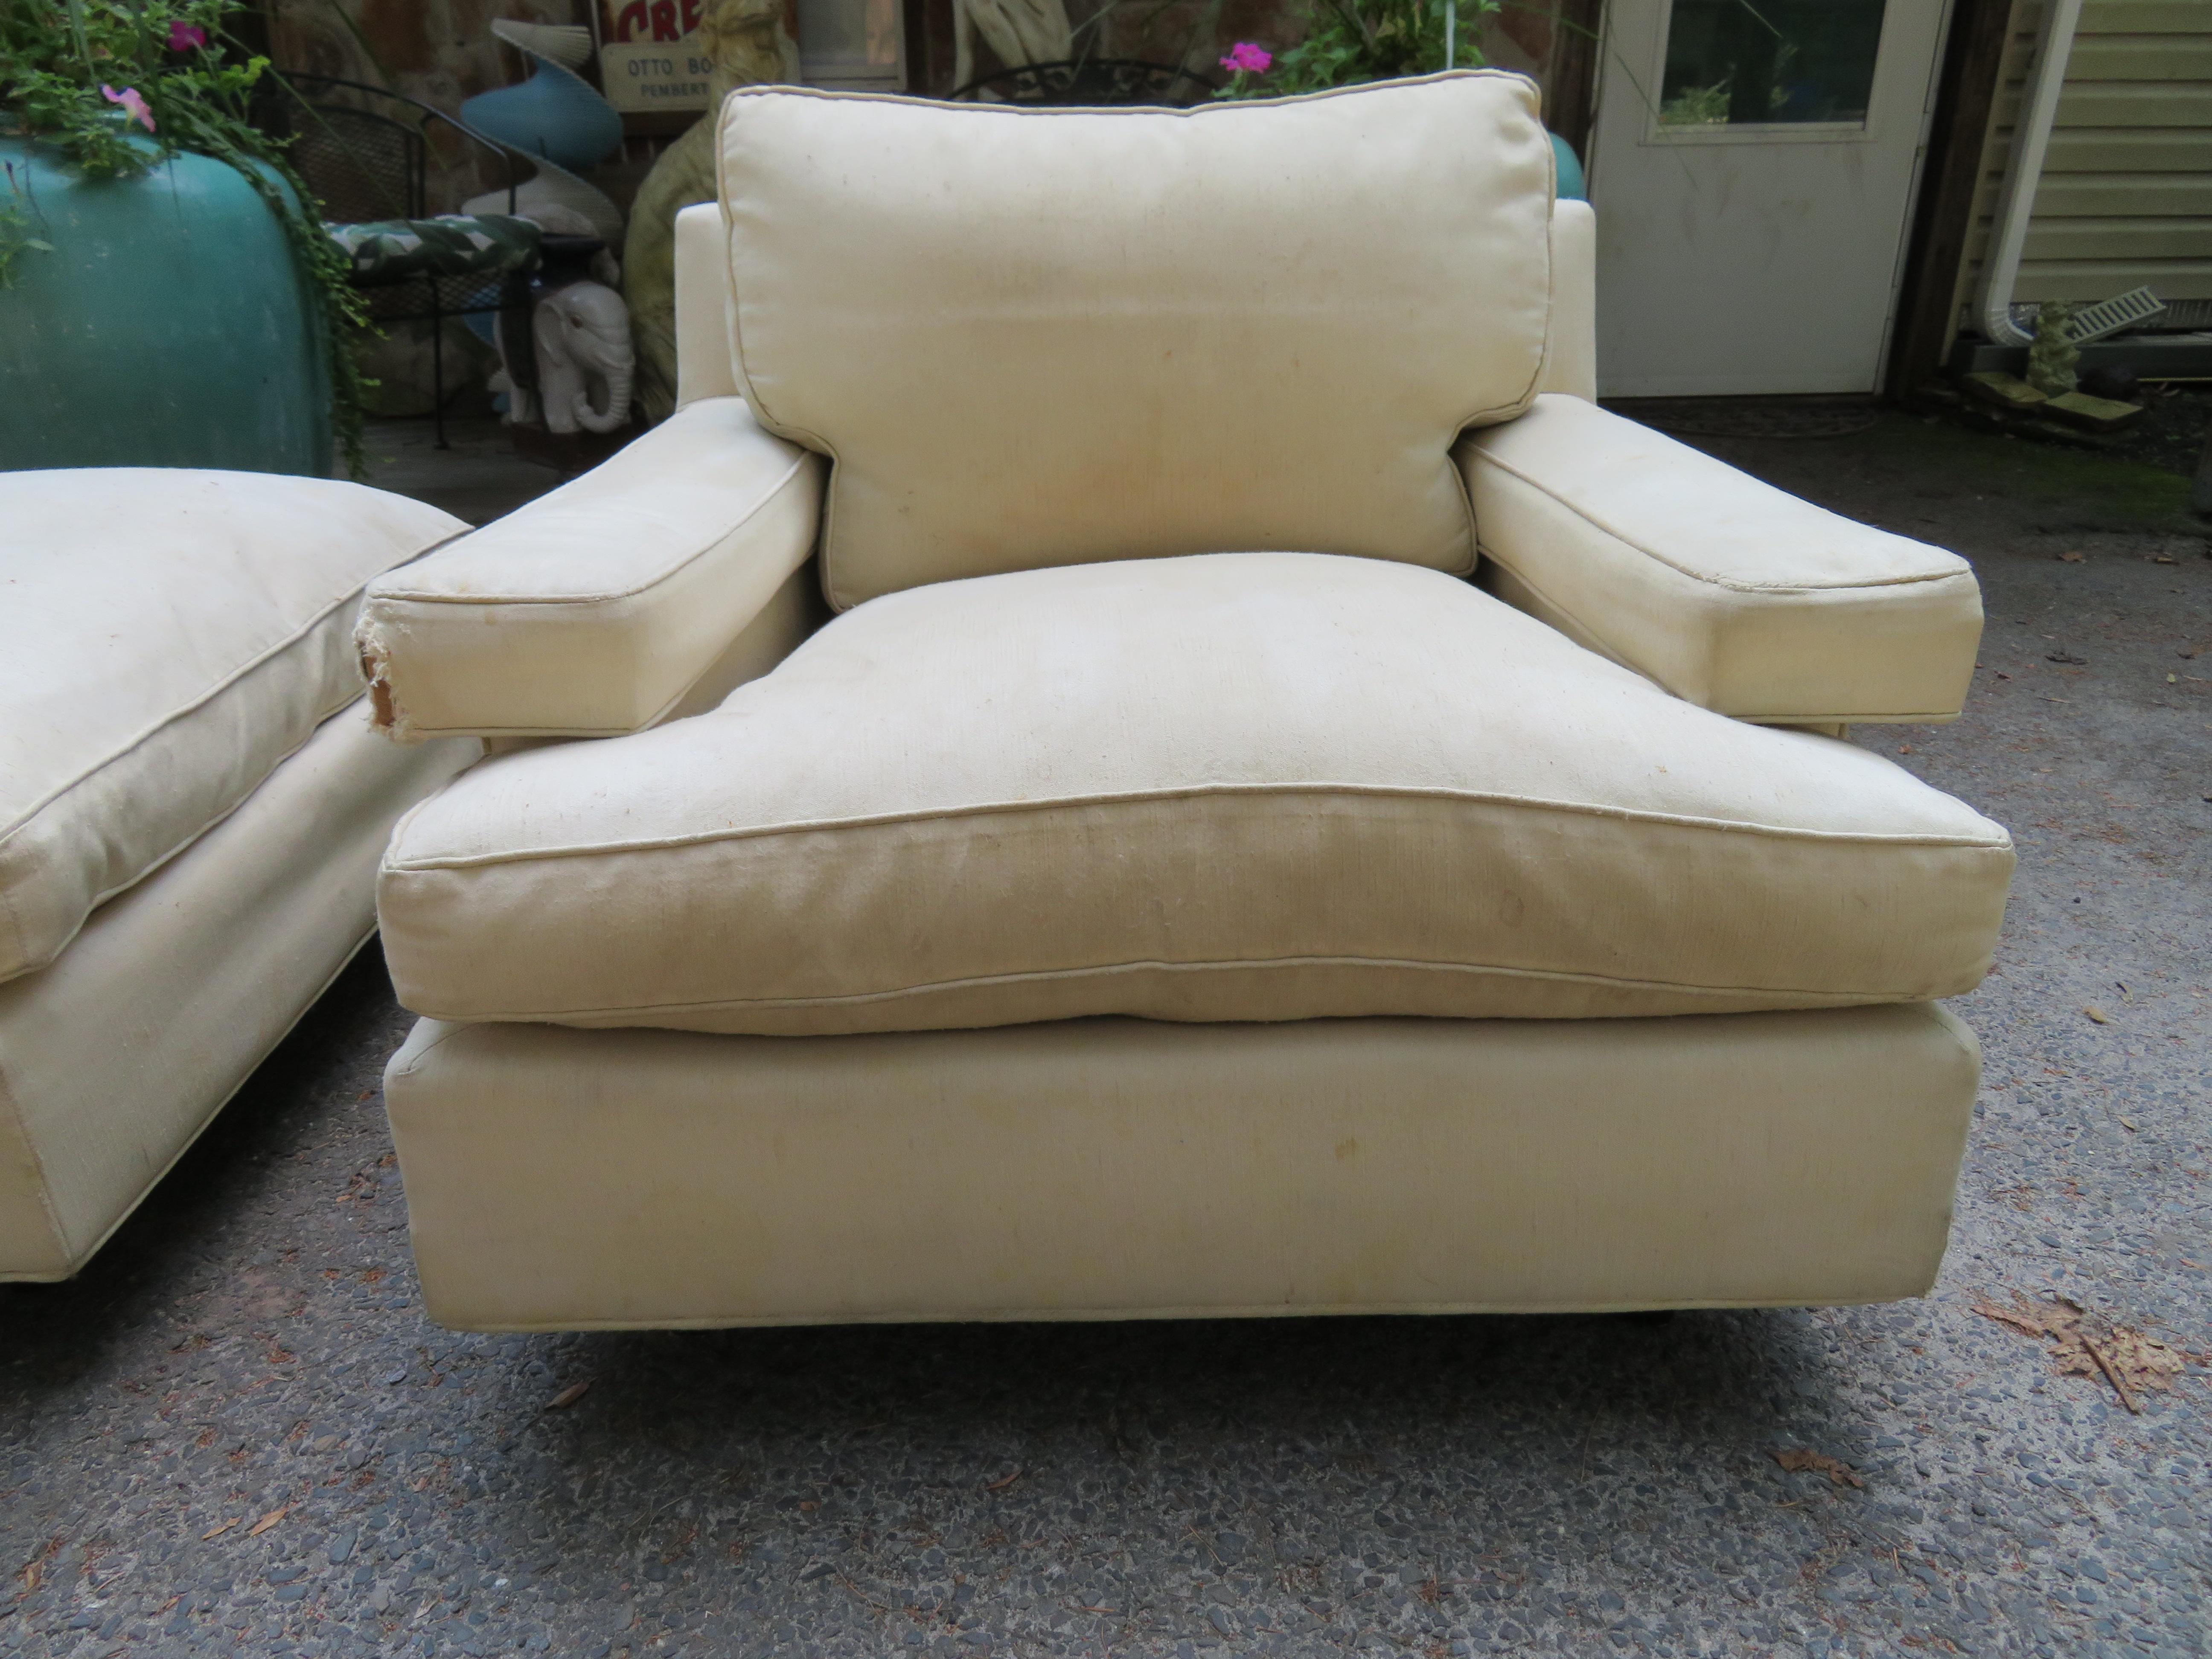 Rare Pair of Harvey Probber Lounge Chairs and Ottoman Mid-Century Modern In Good Condition For Sale In Pemberton, NJ